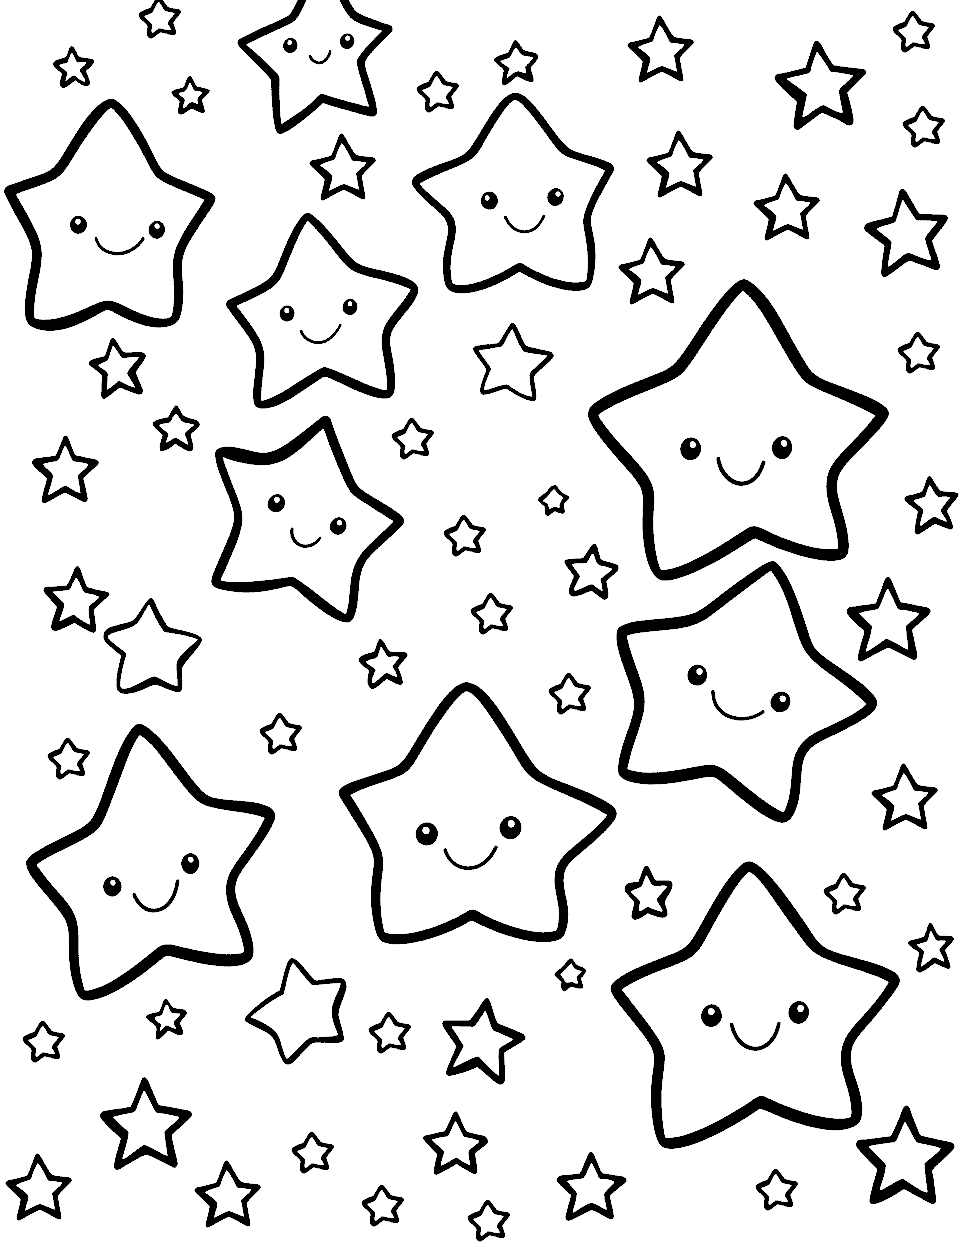 Cute Star Patterns Coloring Page - A page filled with small, adorable stars with smiling faces and twinkling eyes.